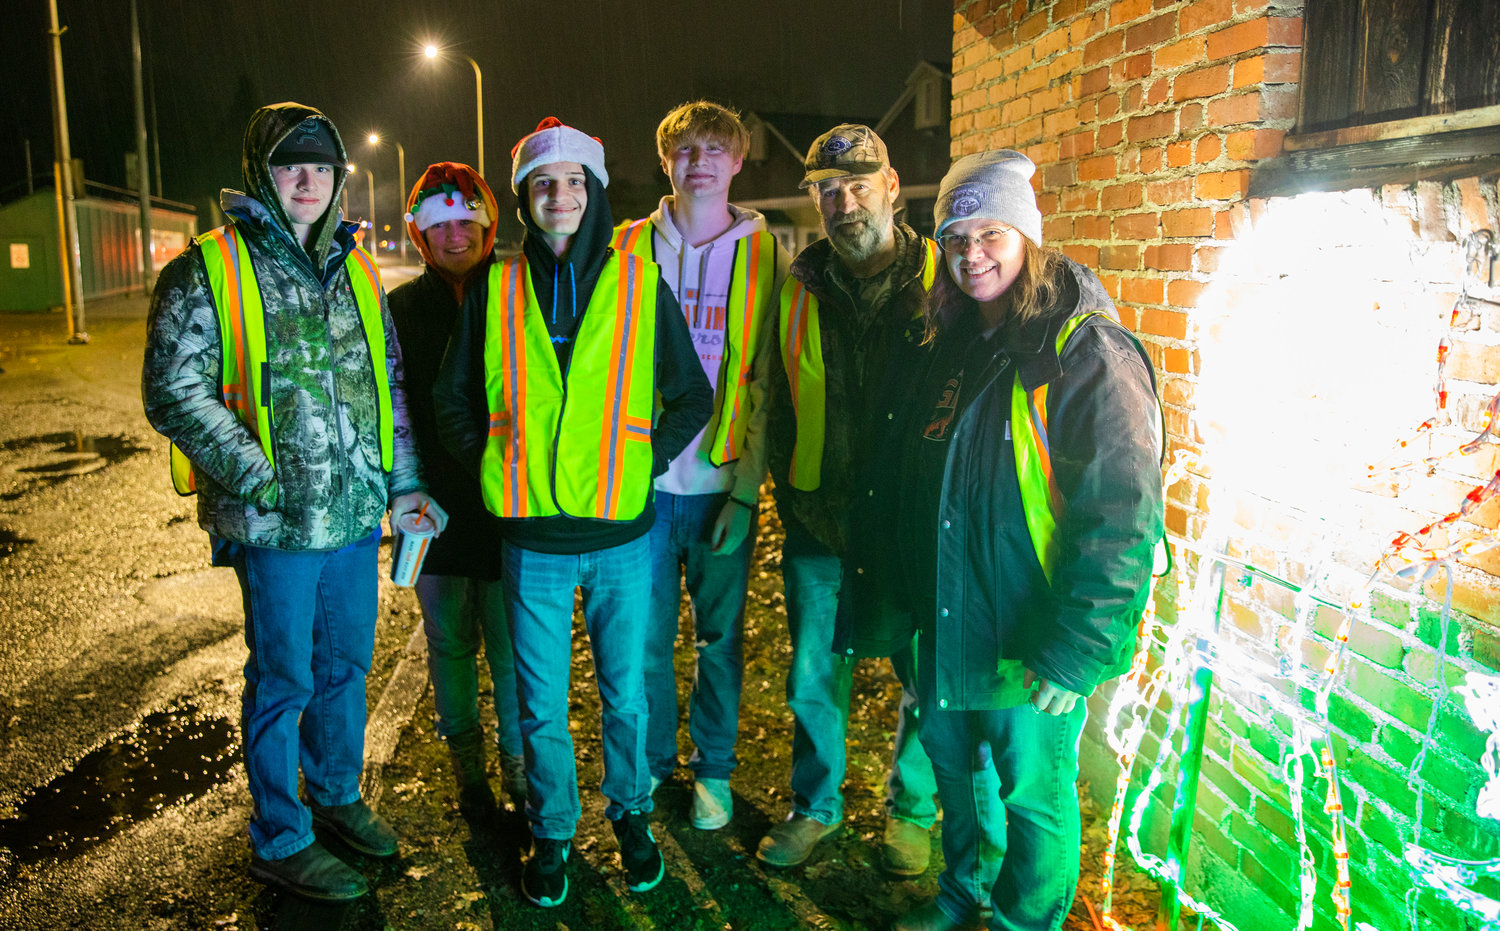 Volunteers smile for a photo at the entrance of the Borst Park Christmas lights display in 2022.